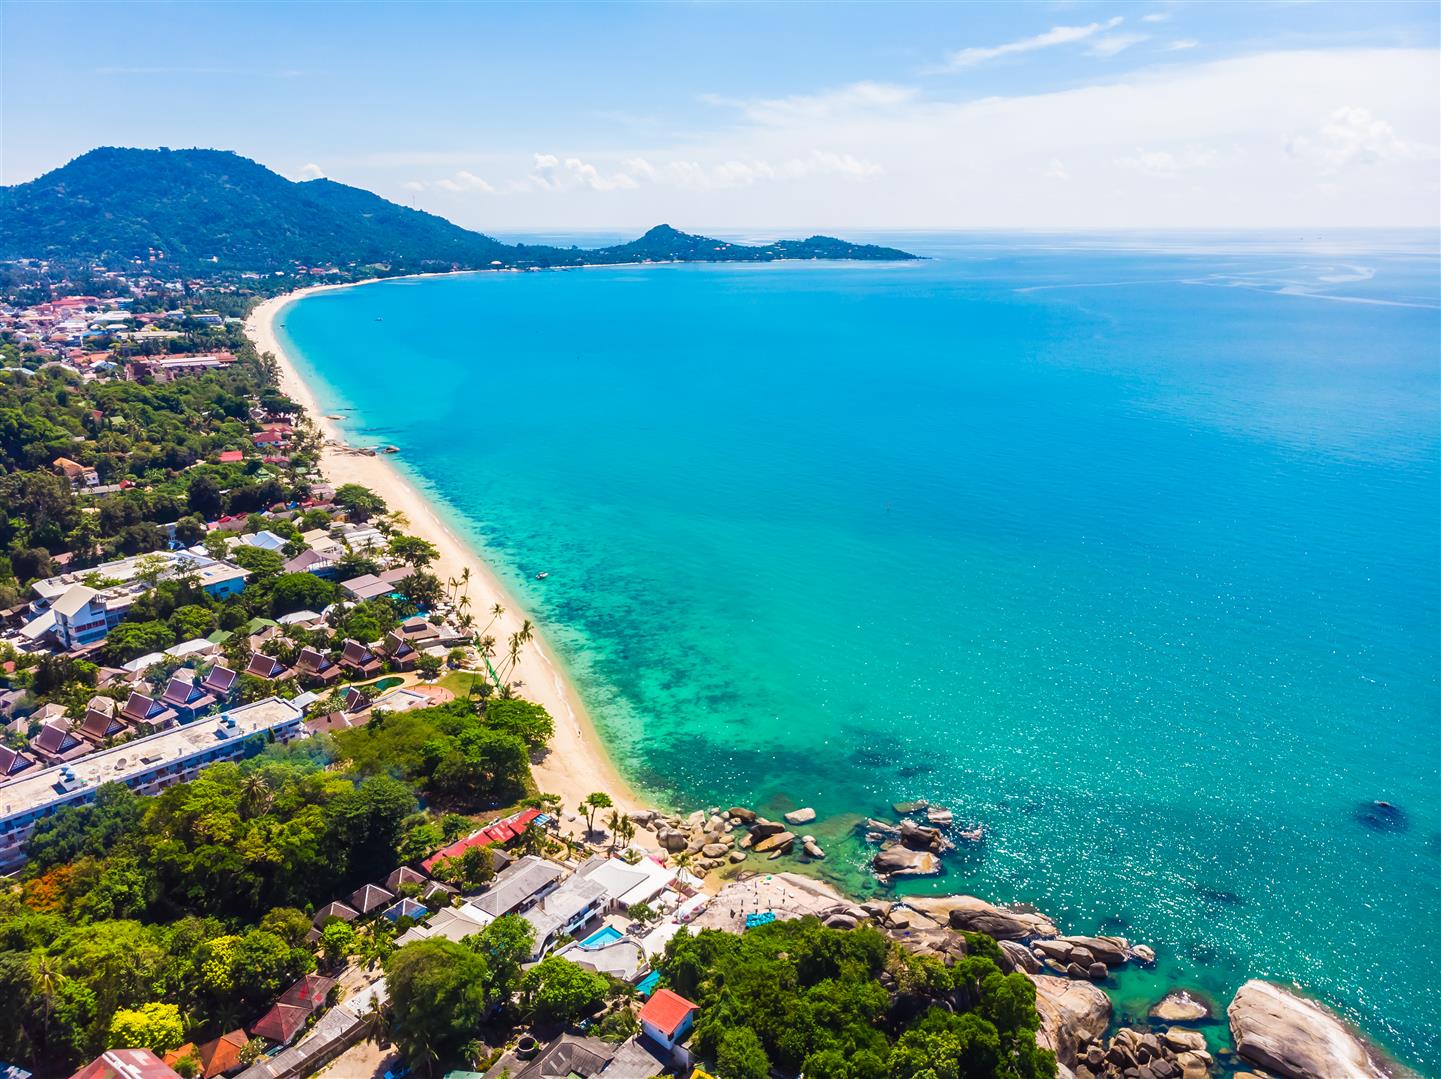 Attractions under the concept of BCG Tourism (BCG Koh Samui travel route)